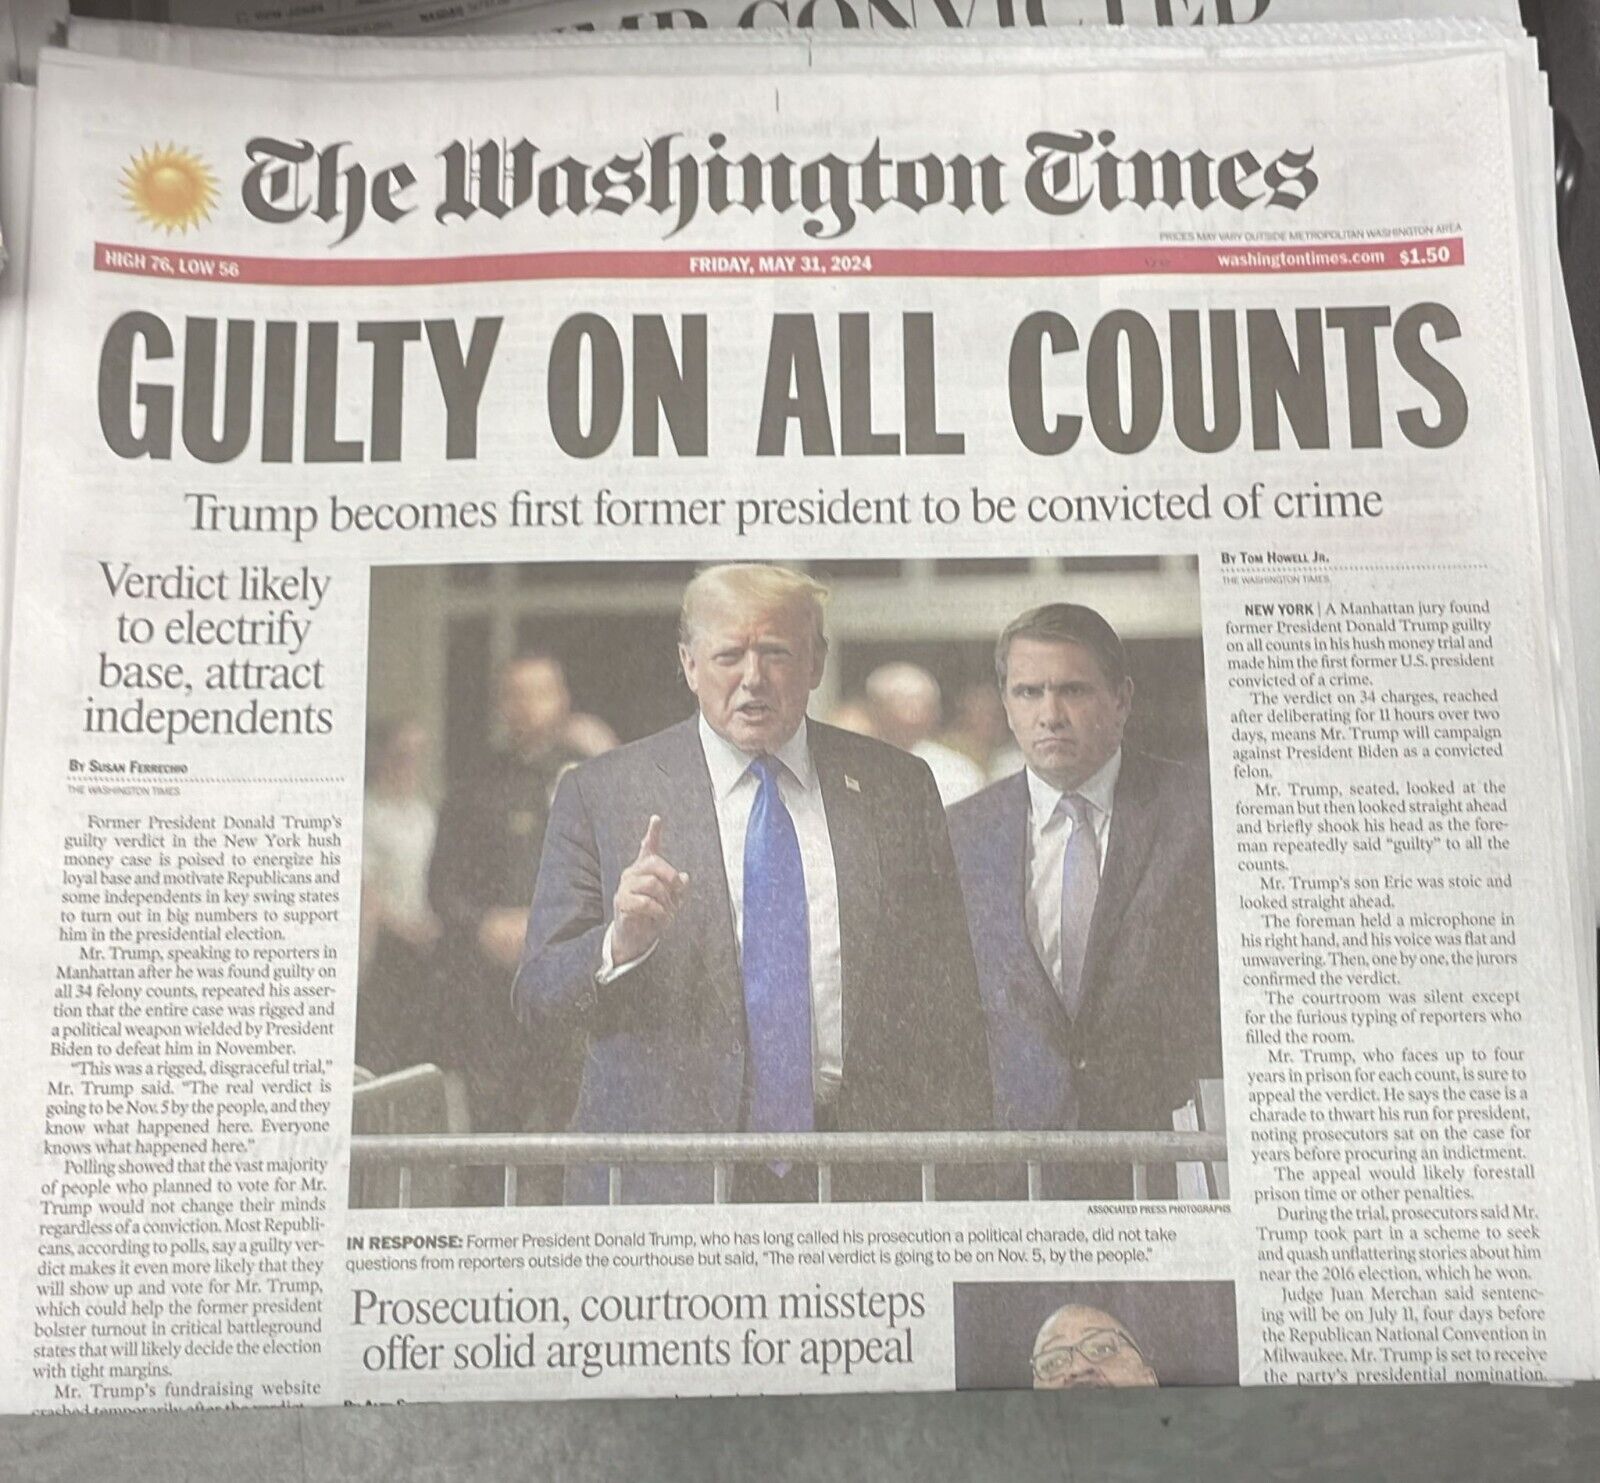 The Washington Times Friday May 31 2024 Guilty On All Counts